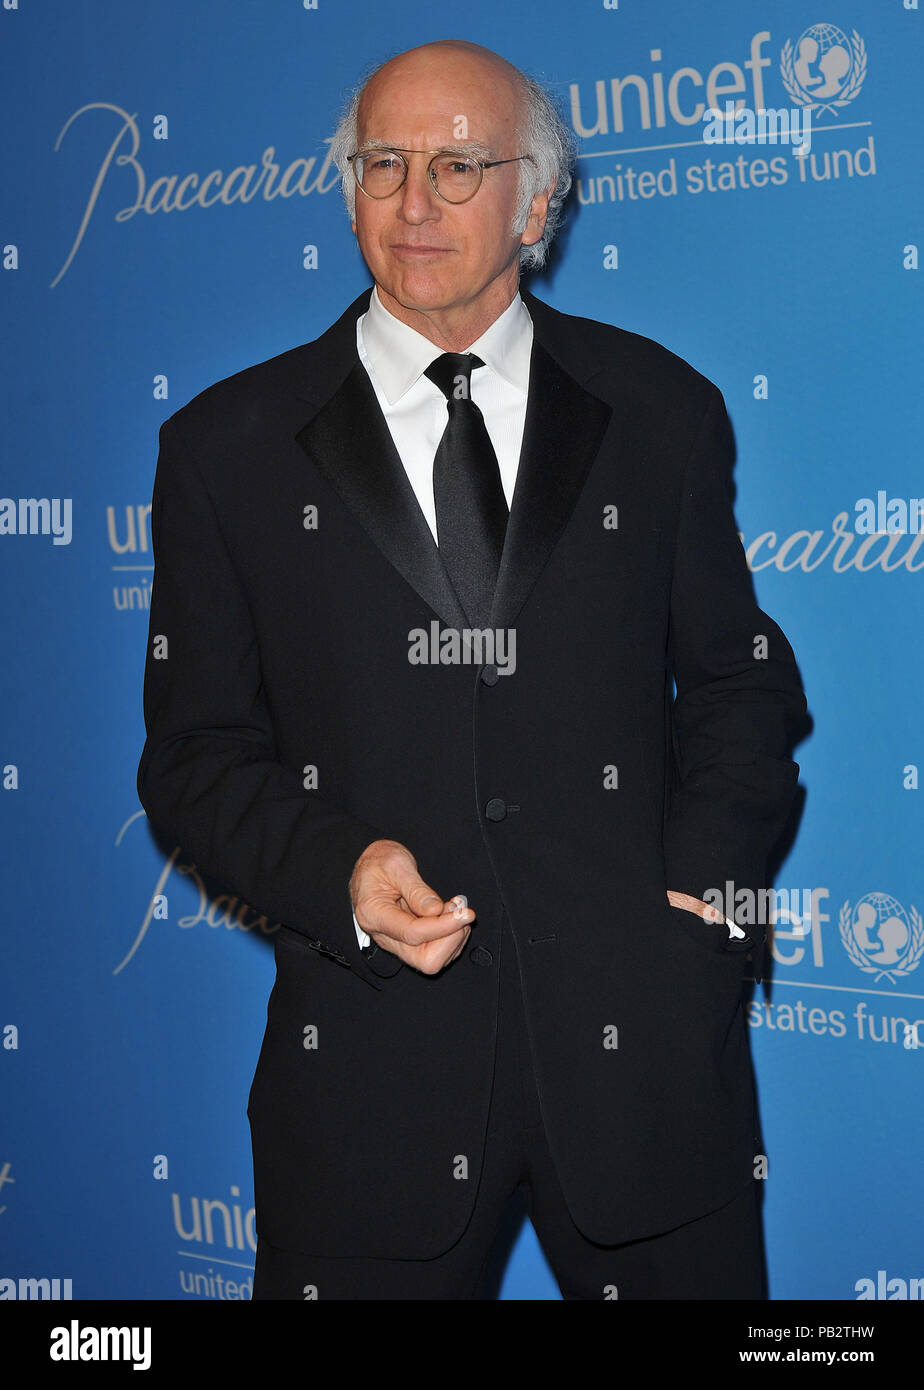 Larry David 45  - 2009 UNICEF Ball at the Beverly Wilshire Hotel In Los AngelesLarry David 45 Red Carpet Event, Vertical, USA, Film Industry, Celebrities,  Photography, Bestof, Arts Culture and Entertainment, Topix Celebrities fashion /  Vertical, Best of, Event in Hollywood Life - California,  Red Carpet and backstage, USA, Film Industry, Celebrities,  movie celebrities, TV celebrities, Music celebrities, Photography, Bestof, Arts Culture and Entertainment,  Topix, vertical, one person,, from the years , 2006 to 2009, inquiry tsuni@Gamma-USA.com - Three Quarters Stock Photo